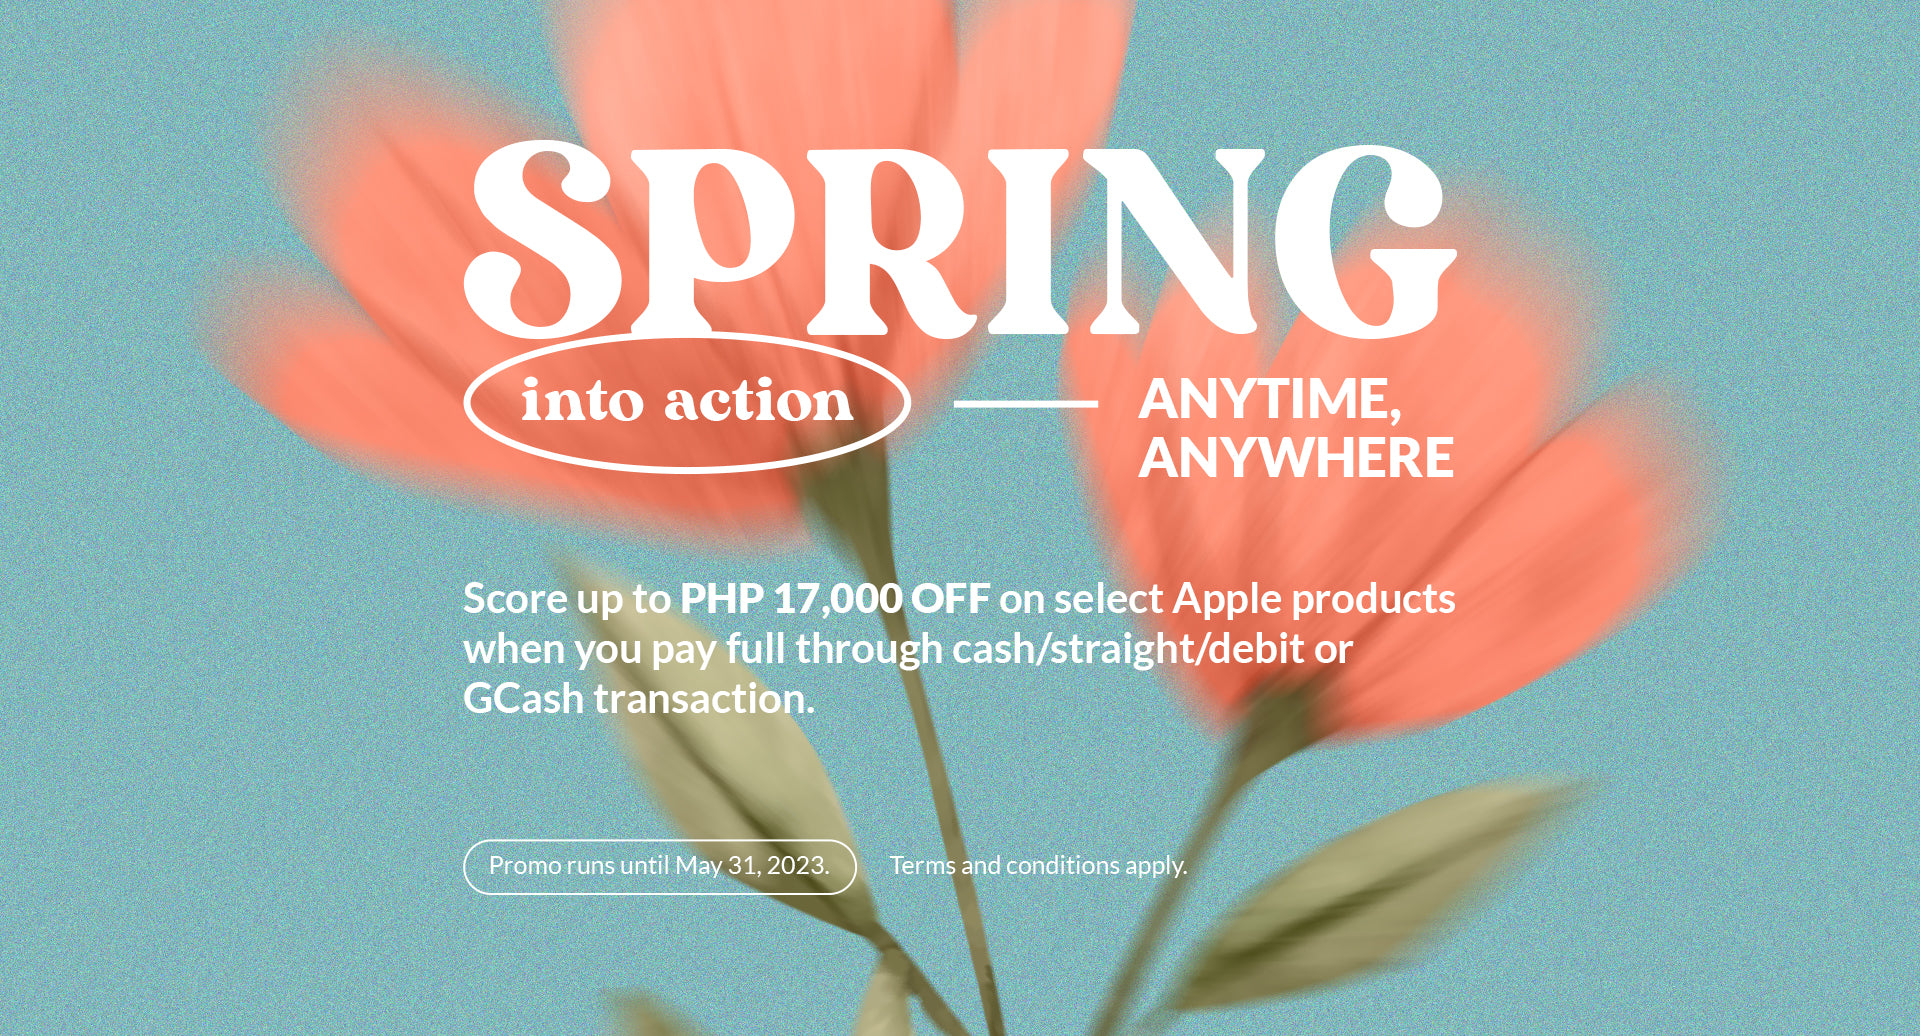 Spring into action, anytime, anywhere! Score up to PHP17,000 off on select Apple products